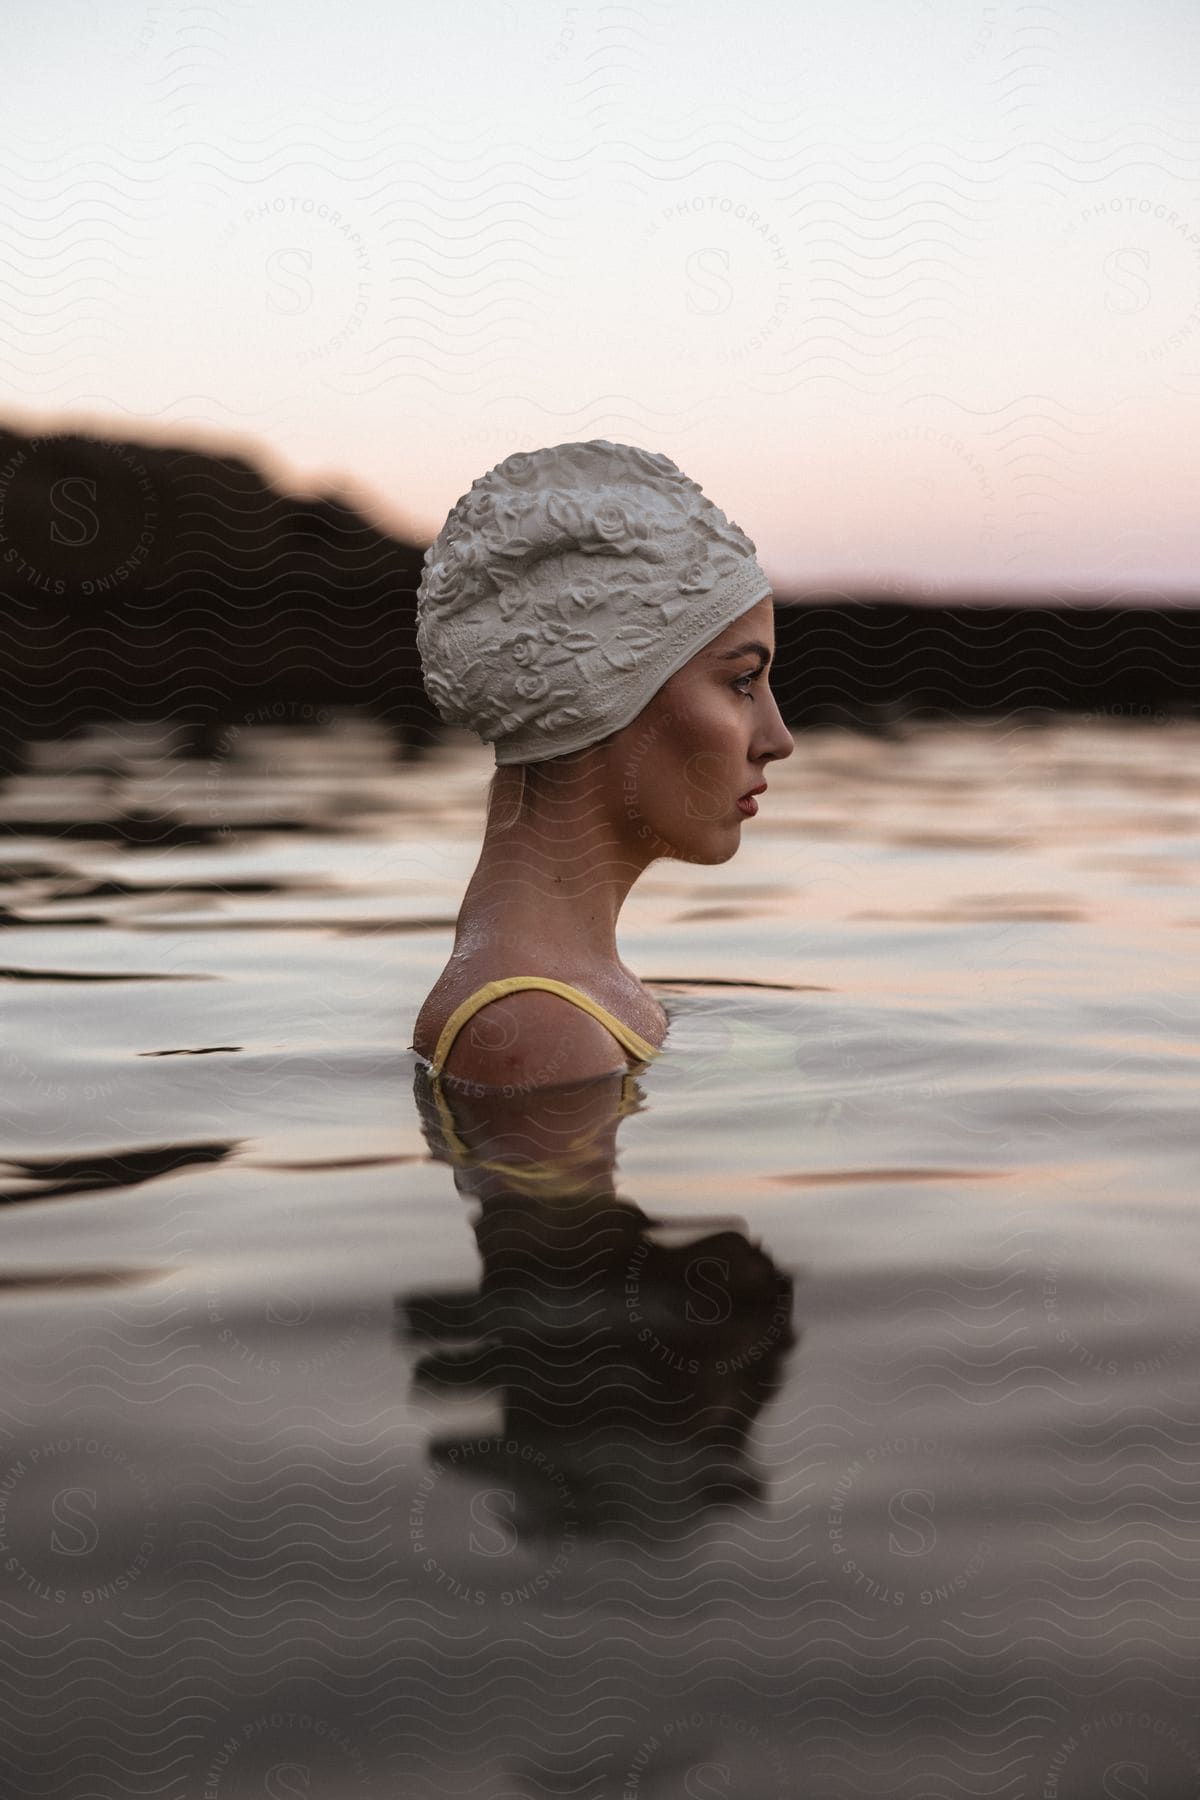 A woman swimming in a body of water